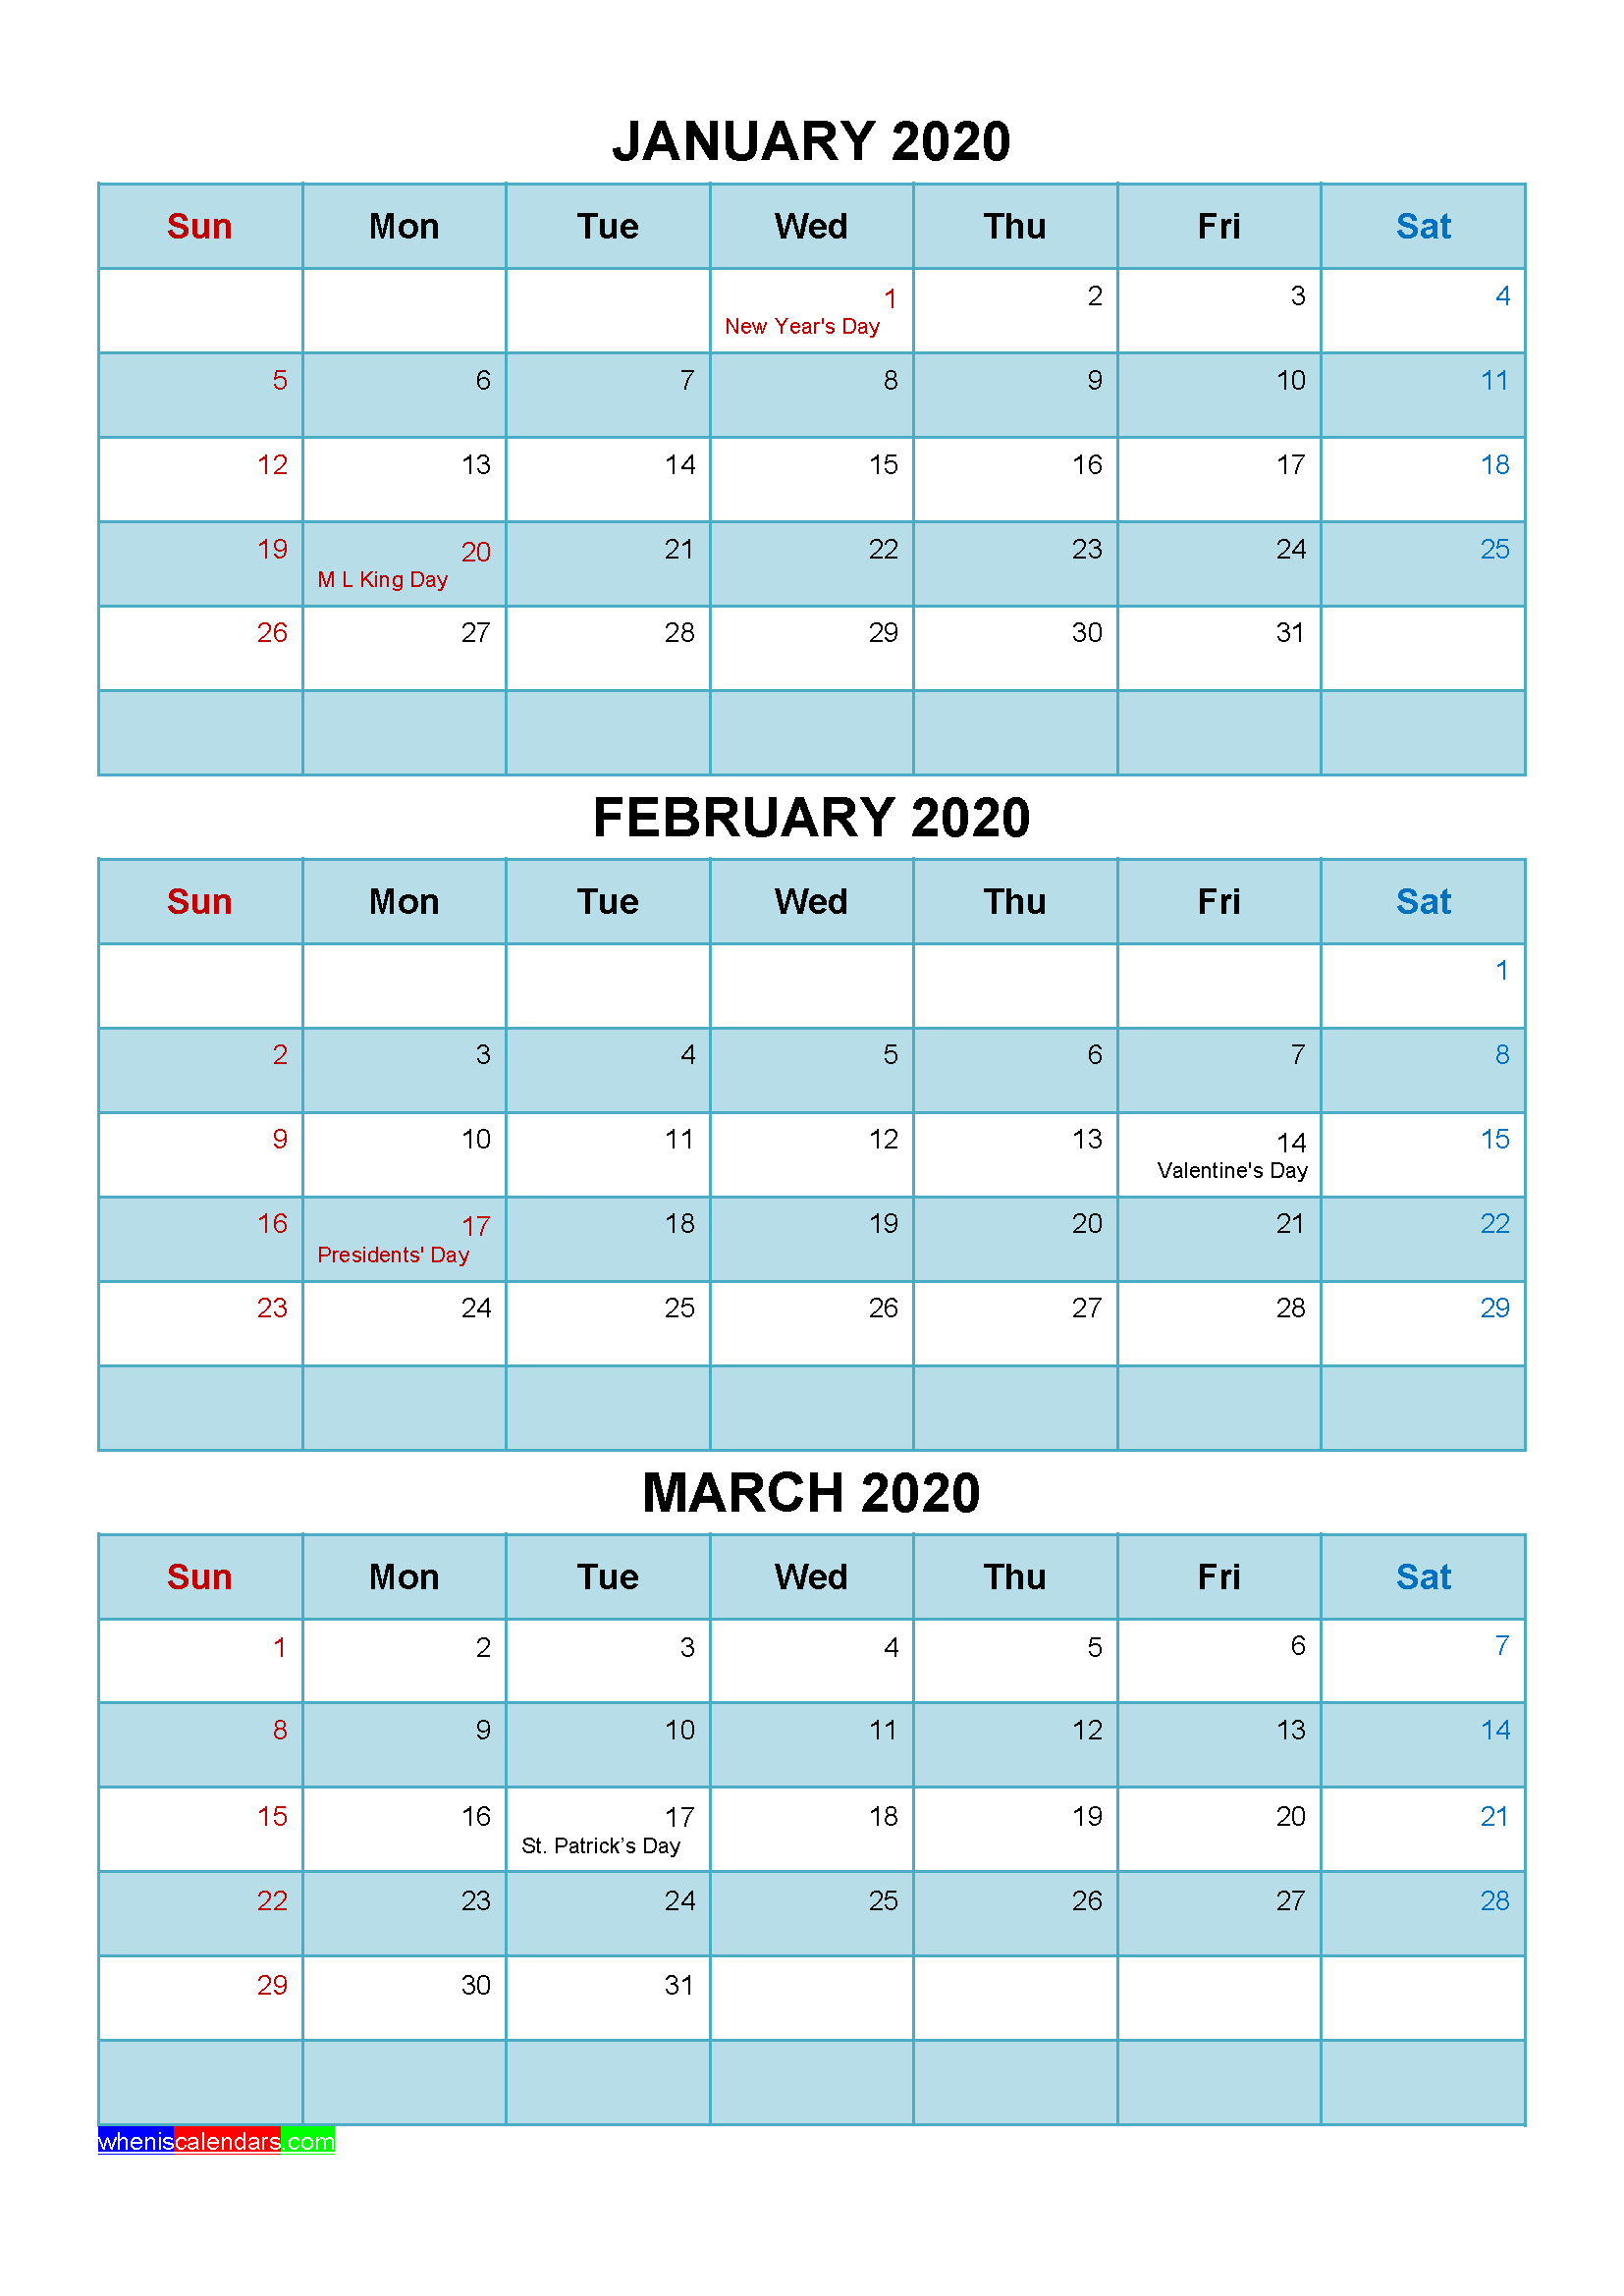 Free January February March 2020 Calendar with Holidays